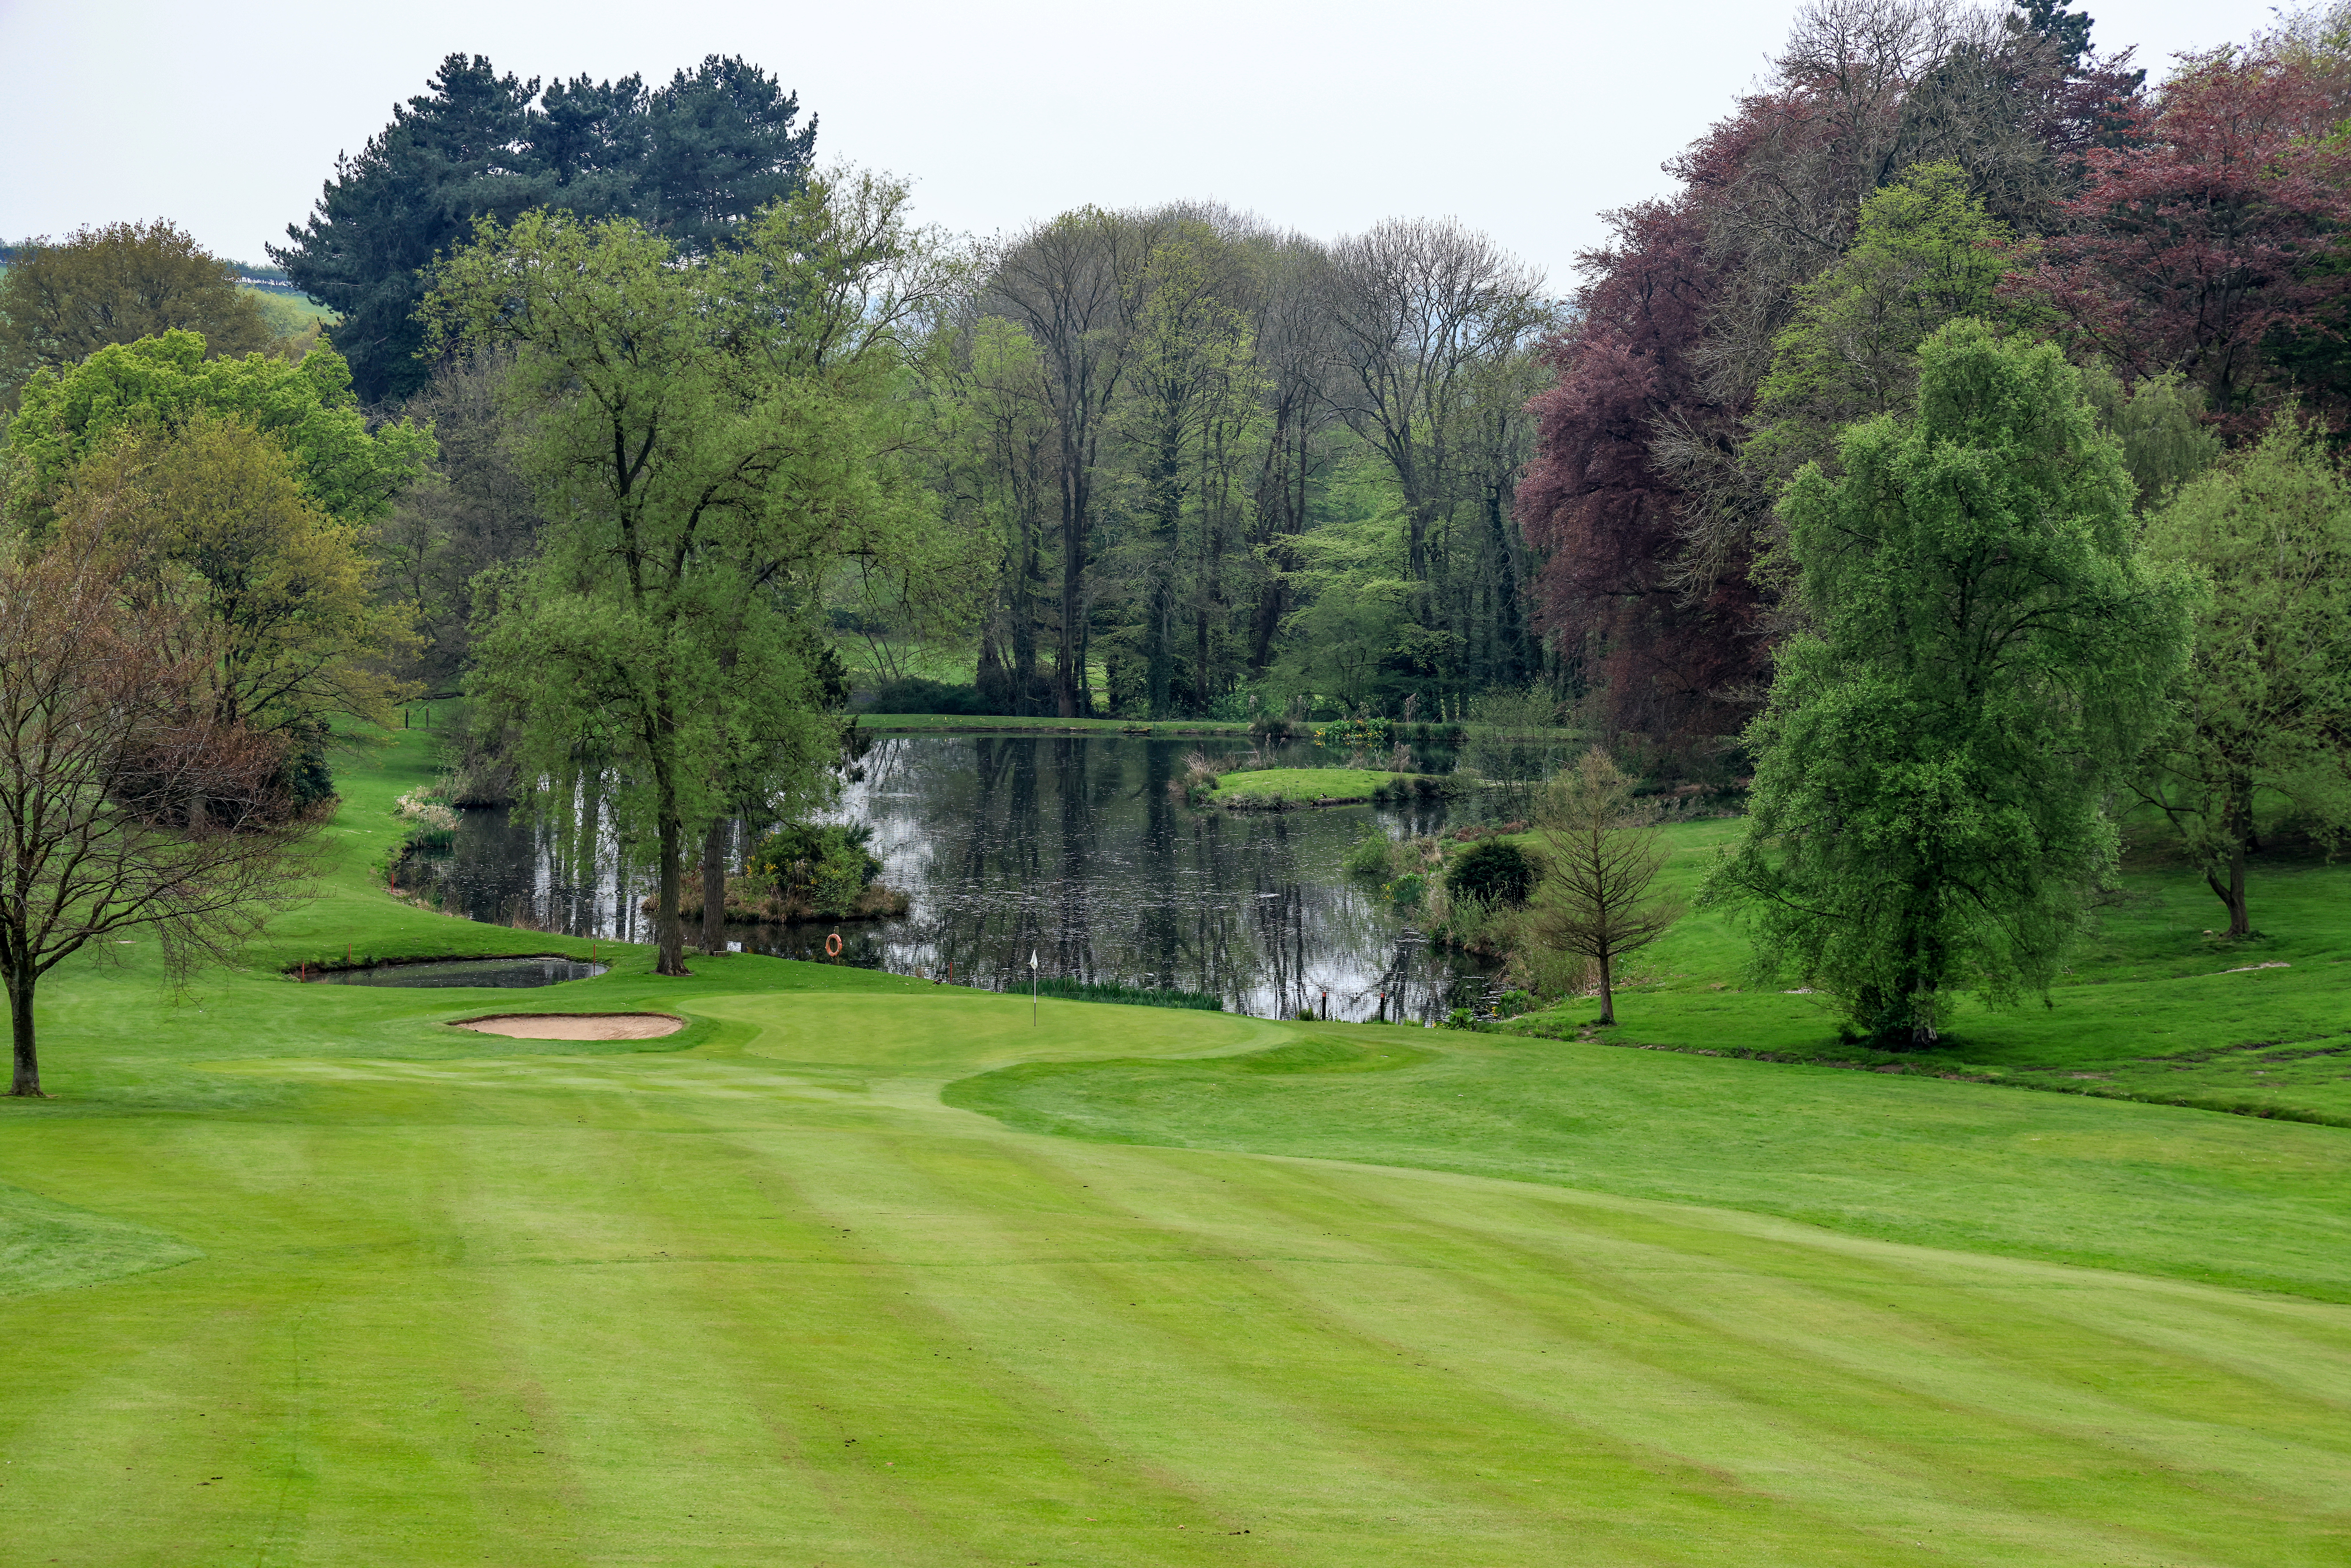 A view of the approach to the green on the par on a golf course